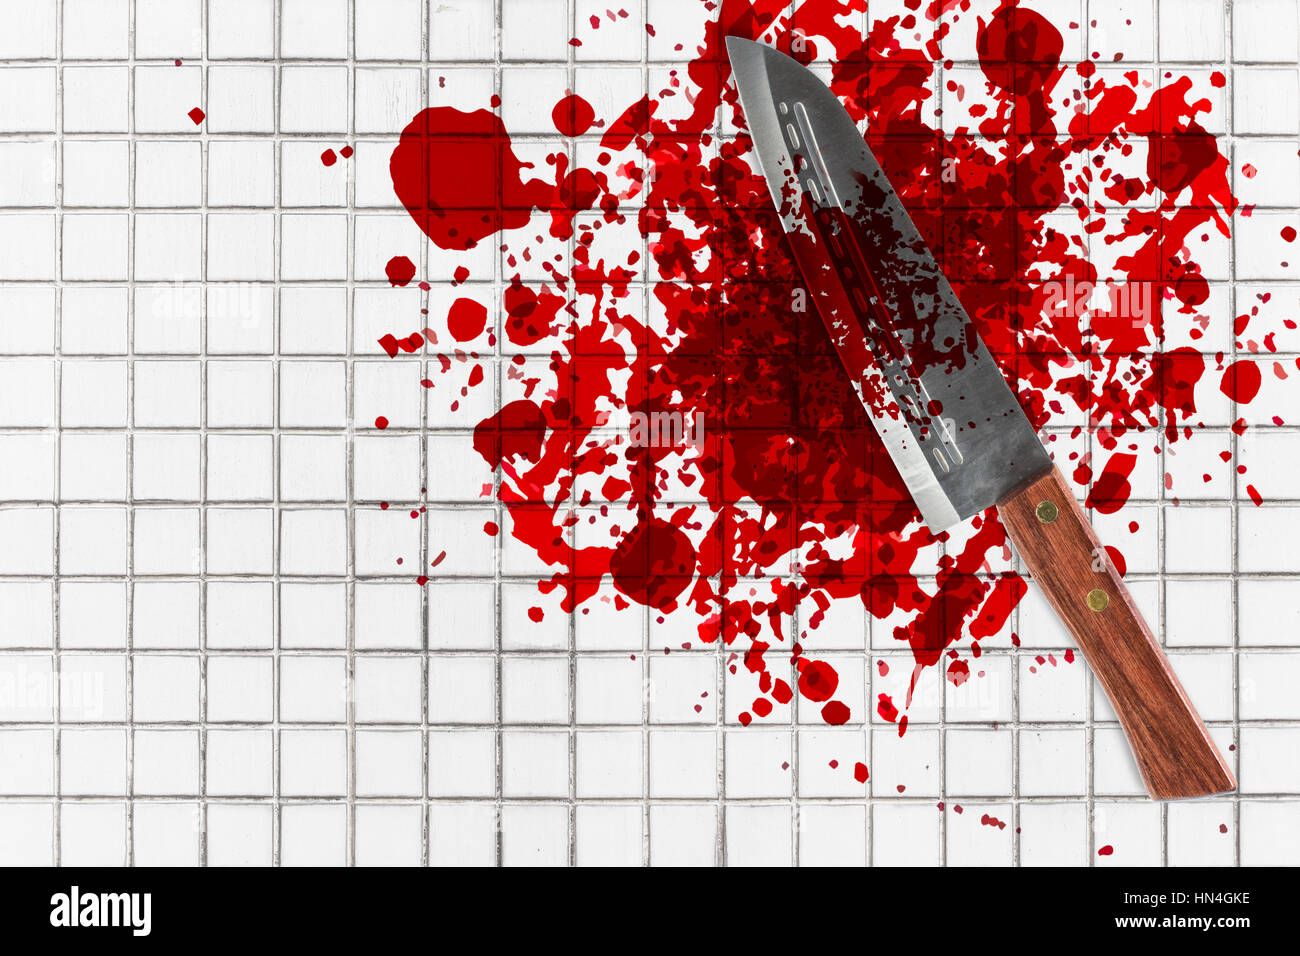 knife with grunge of blood on toilet mosaic floor, halloween bloody murder  or death crime killer violation concept Stock Photo - Alamy